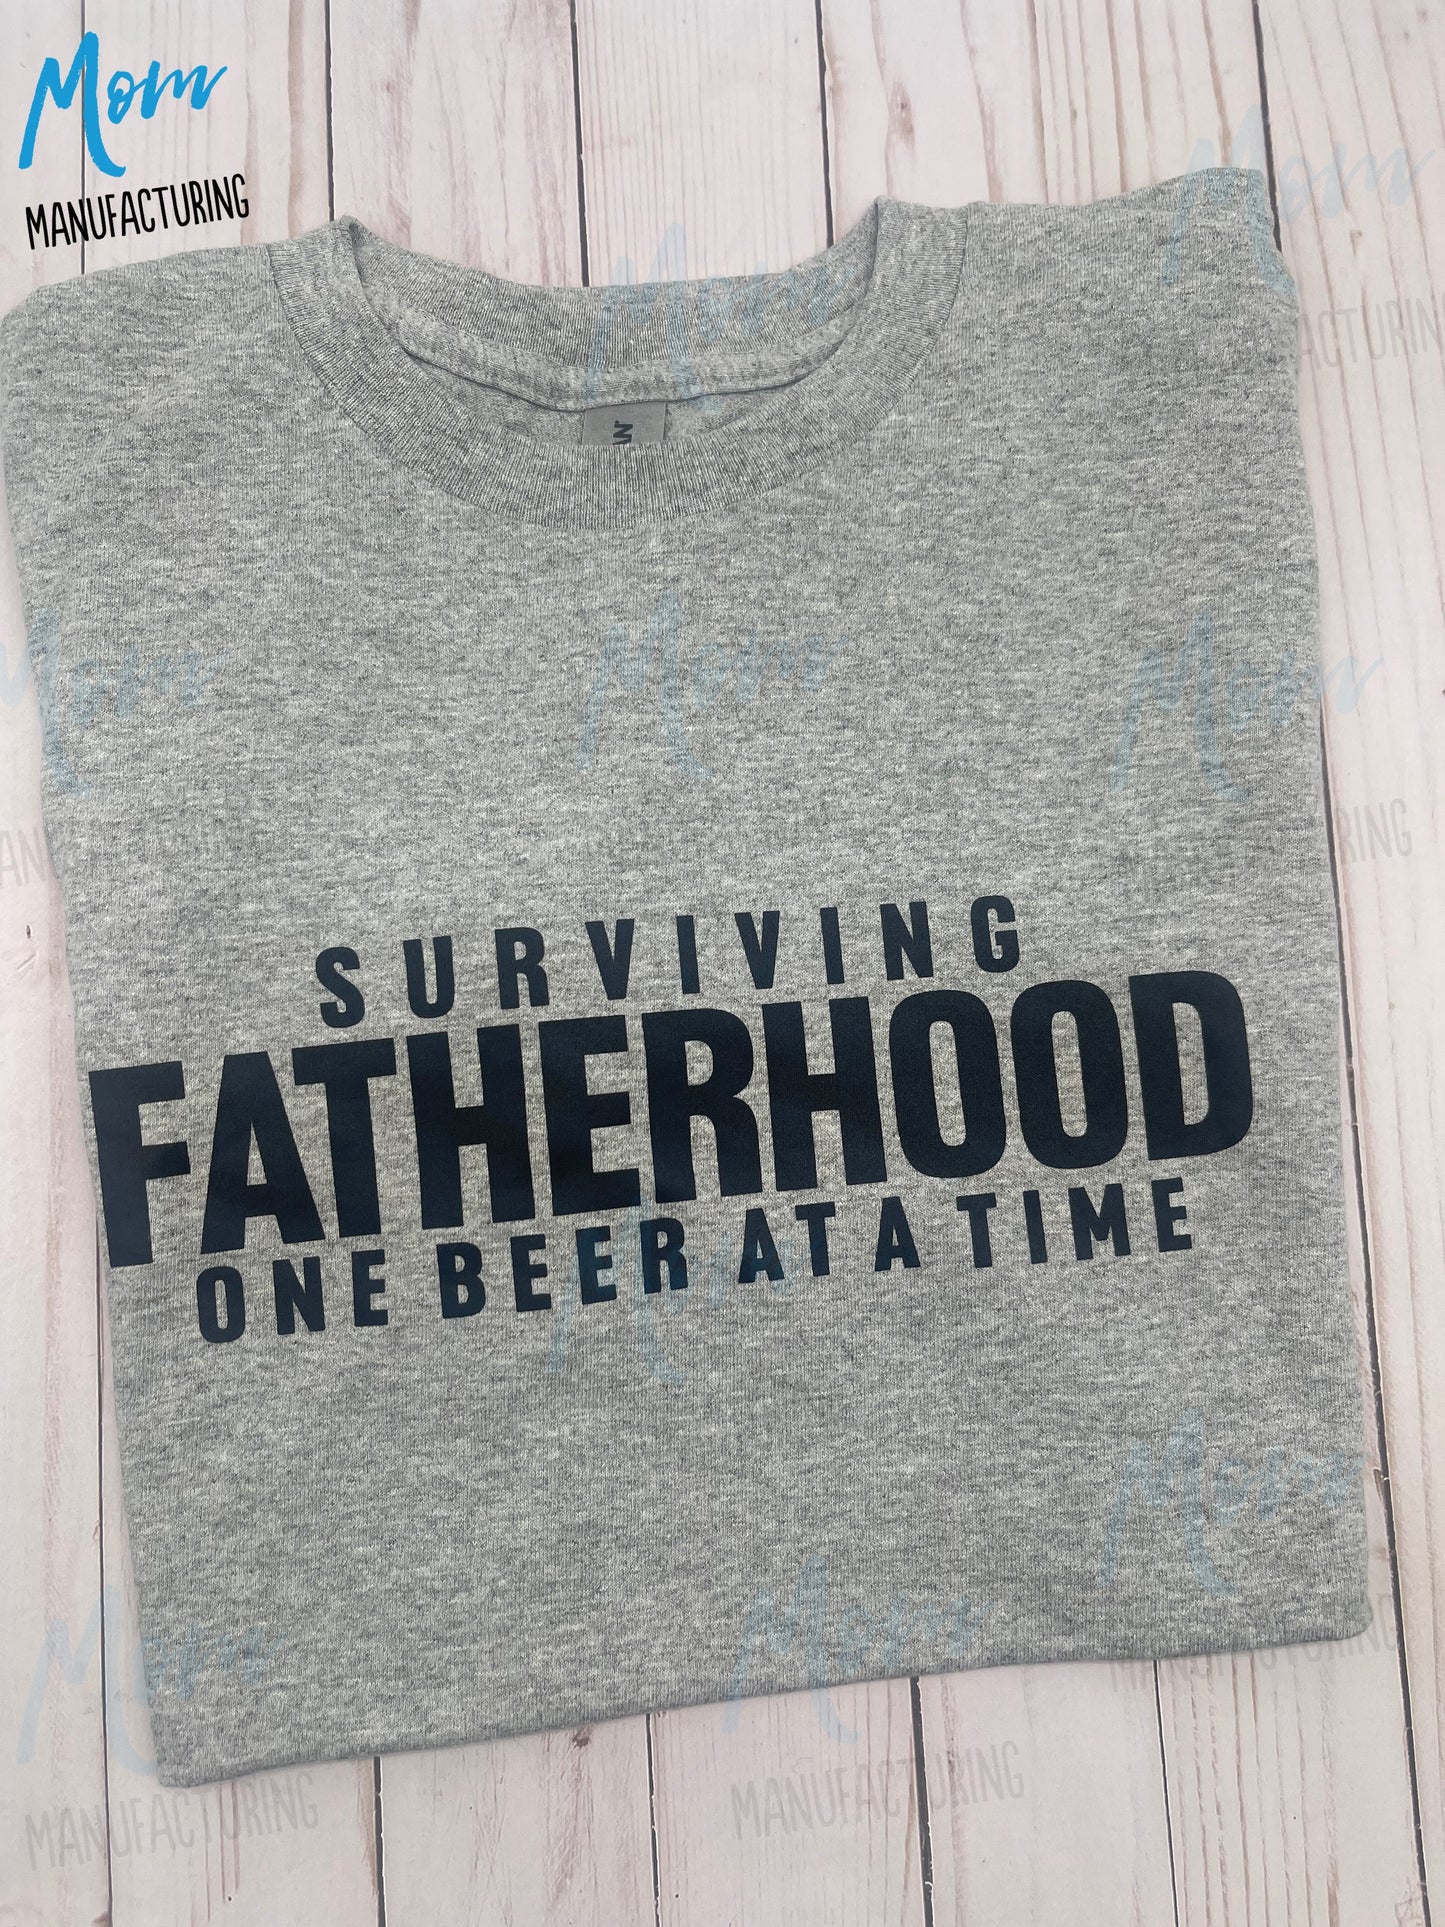 Surviving Fatherhood One Beer at a time!